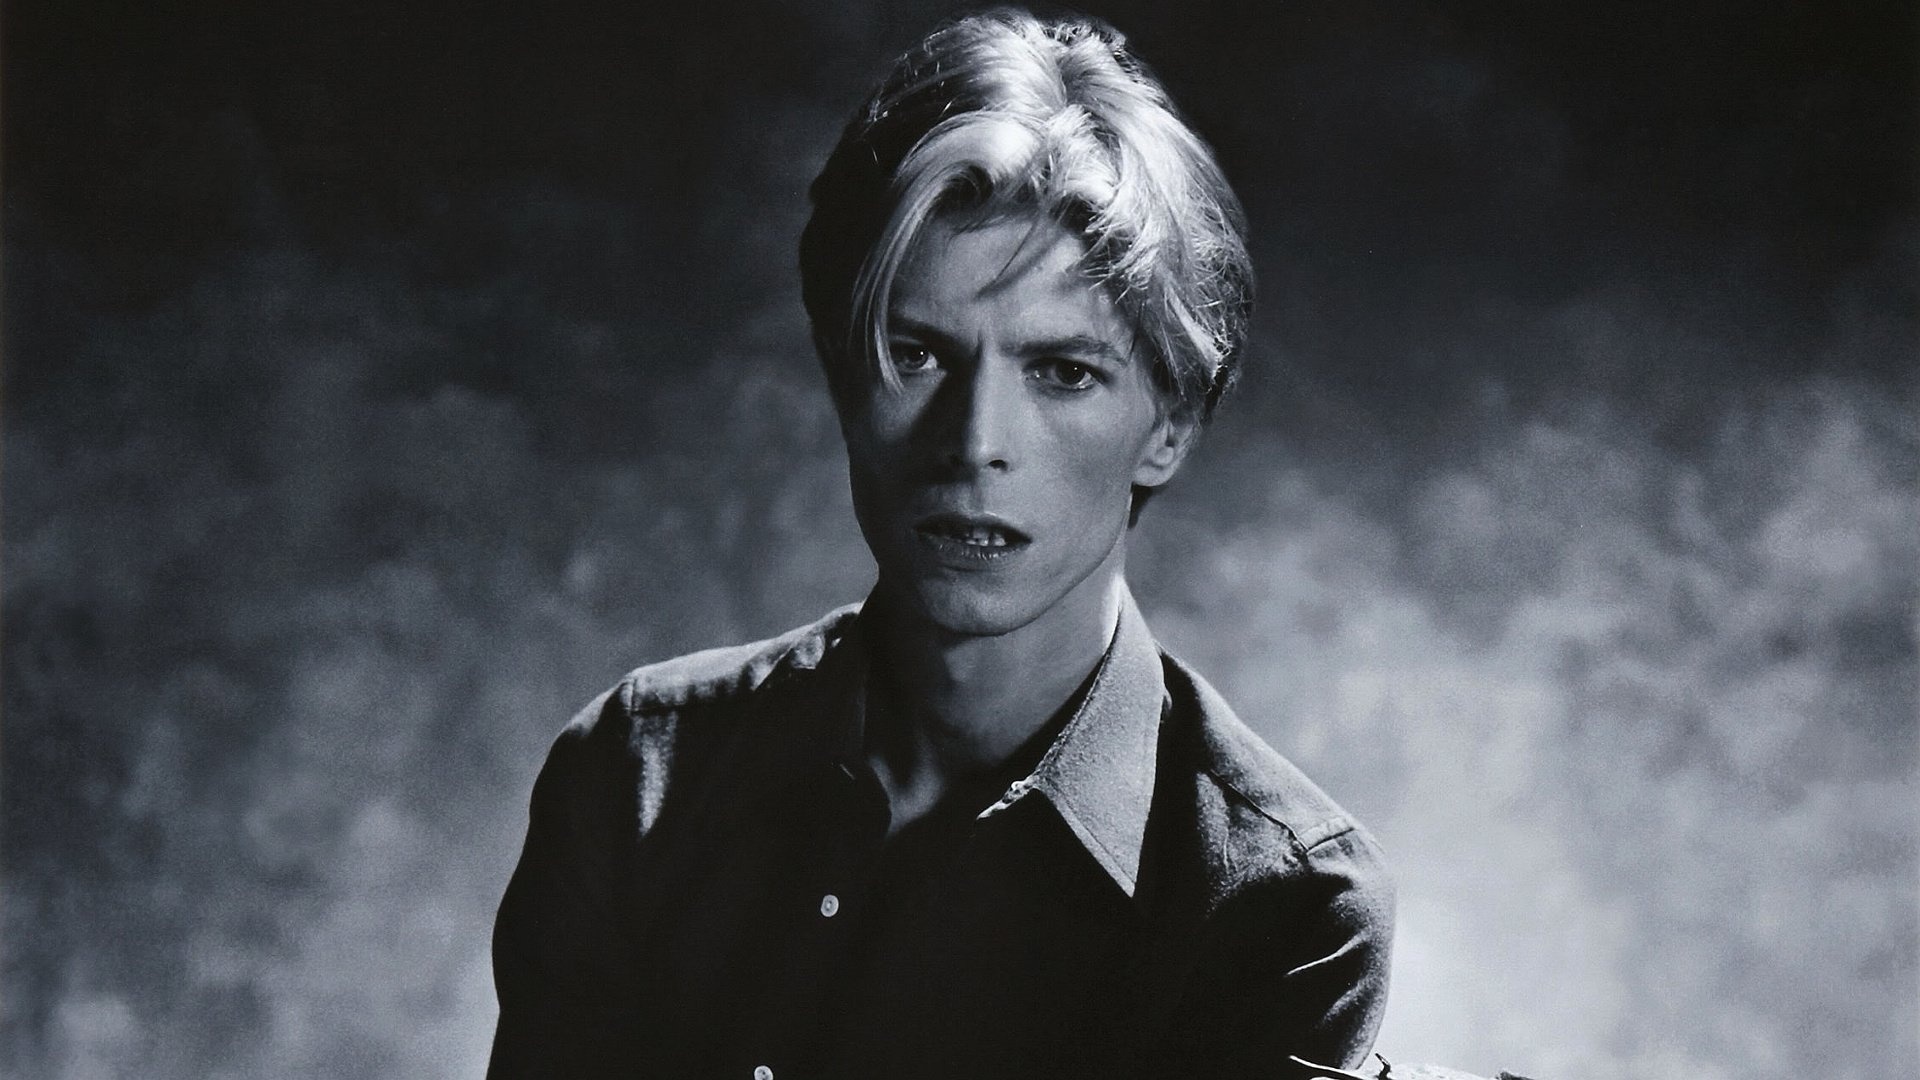 David Bowie: "Time" was written in November 1972 during the American leg of the Ziggy Stardust Tour. 1920x1080 Full HD Wallpaper.